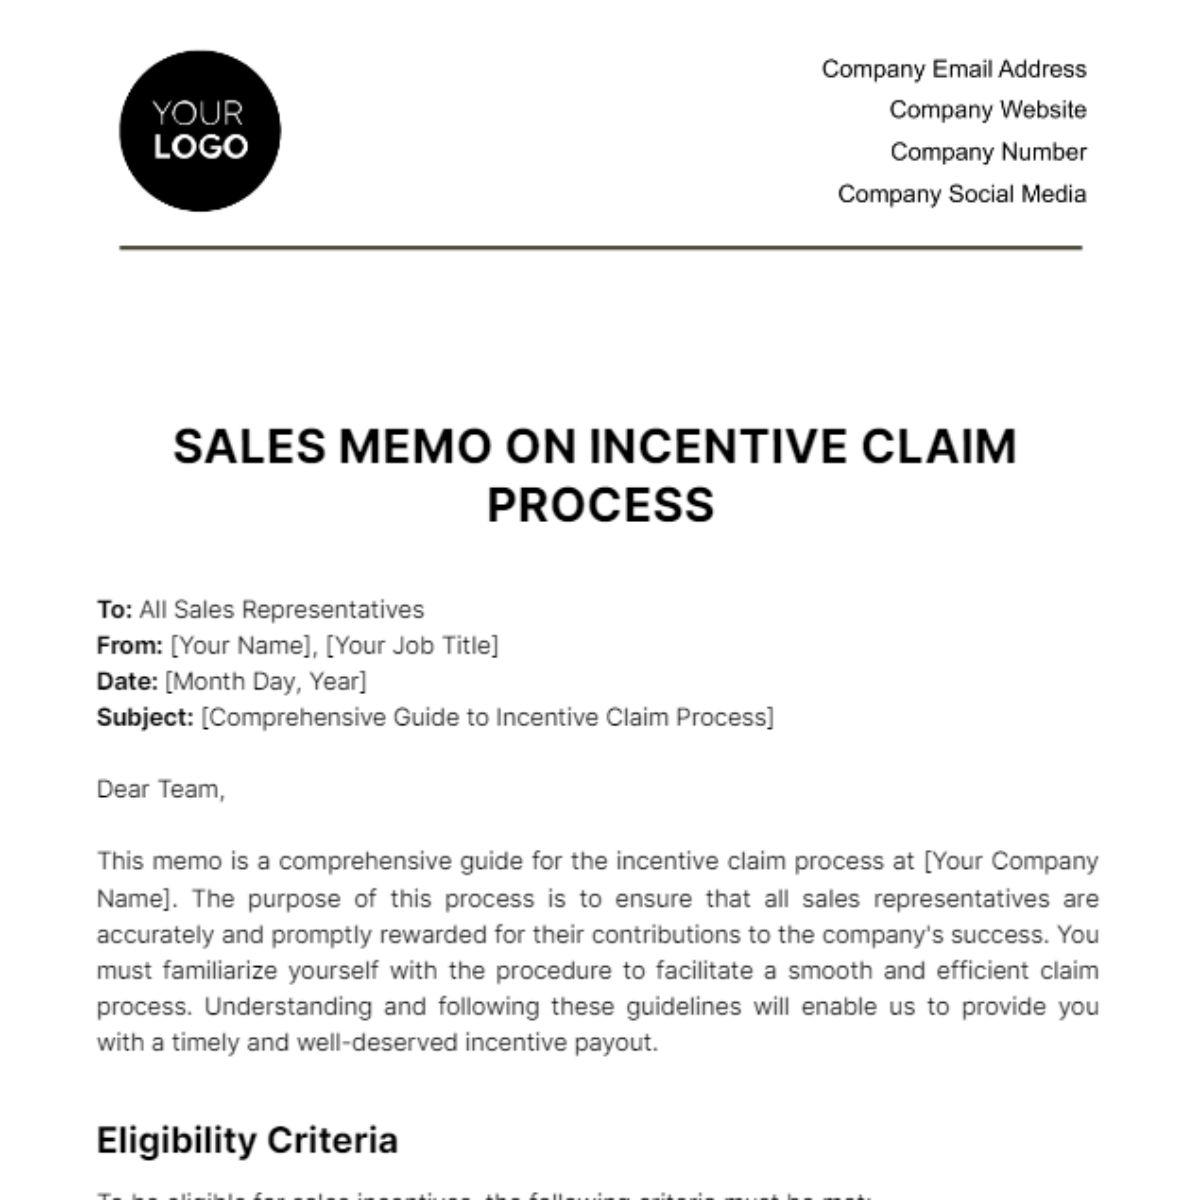 Free Sales Memo on Incentive Claim Process Template